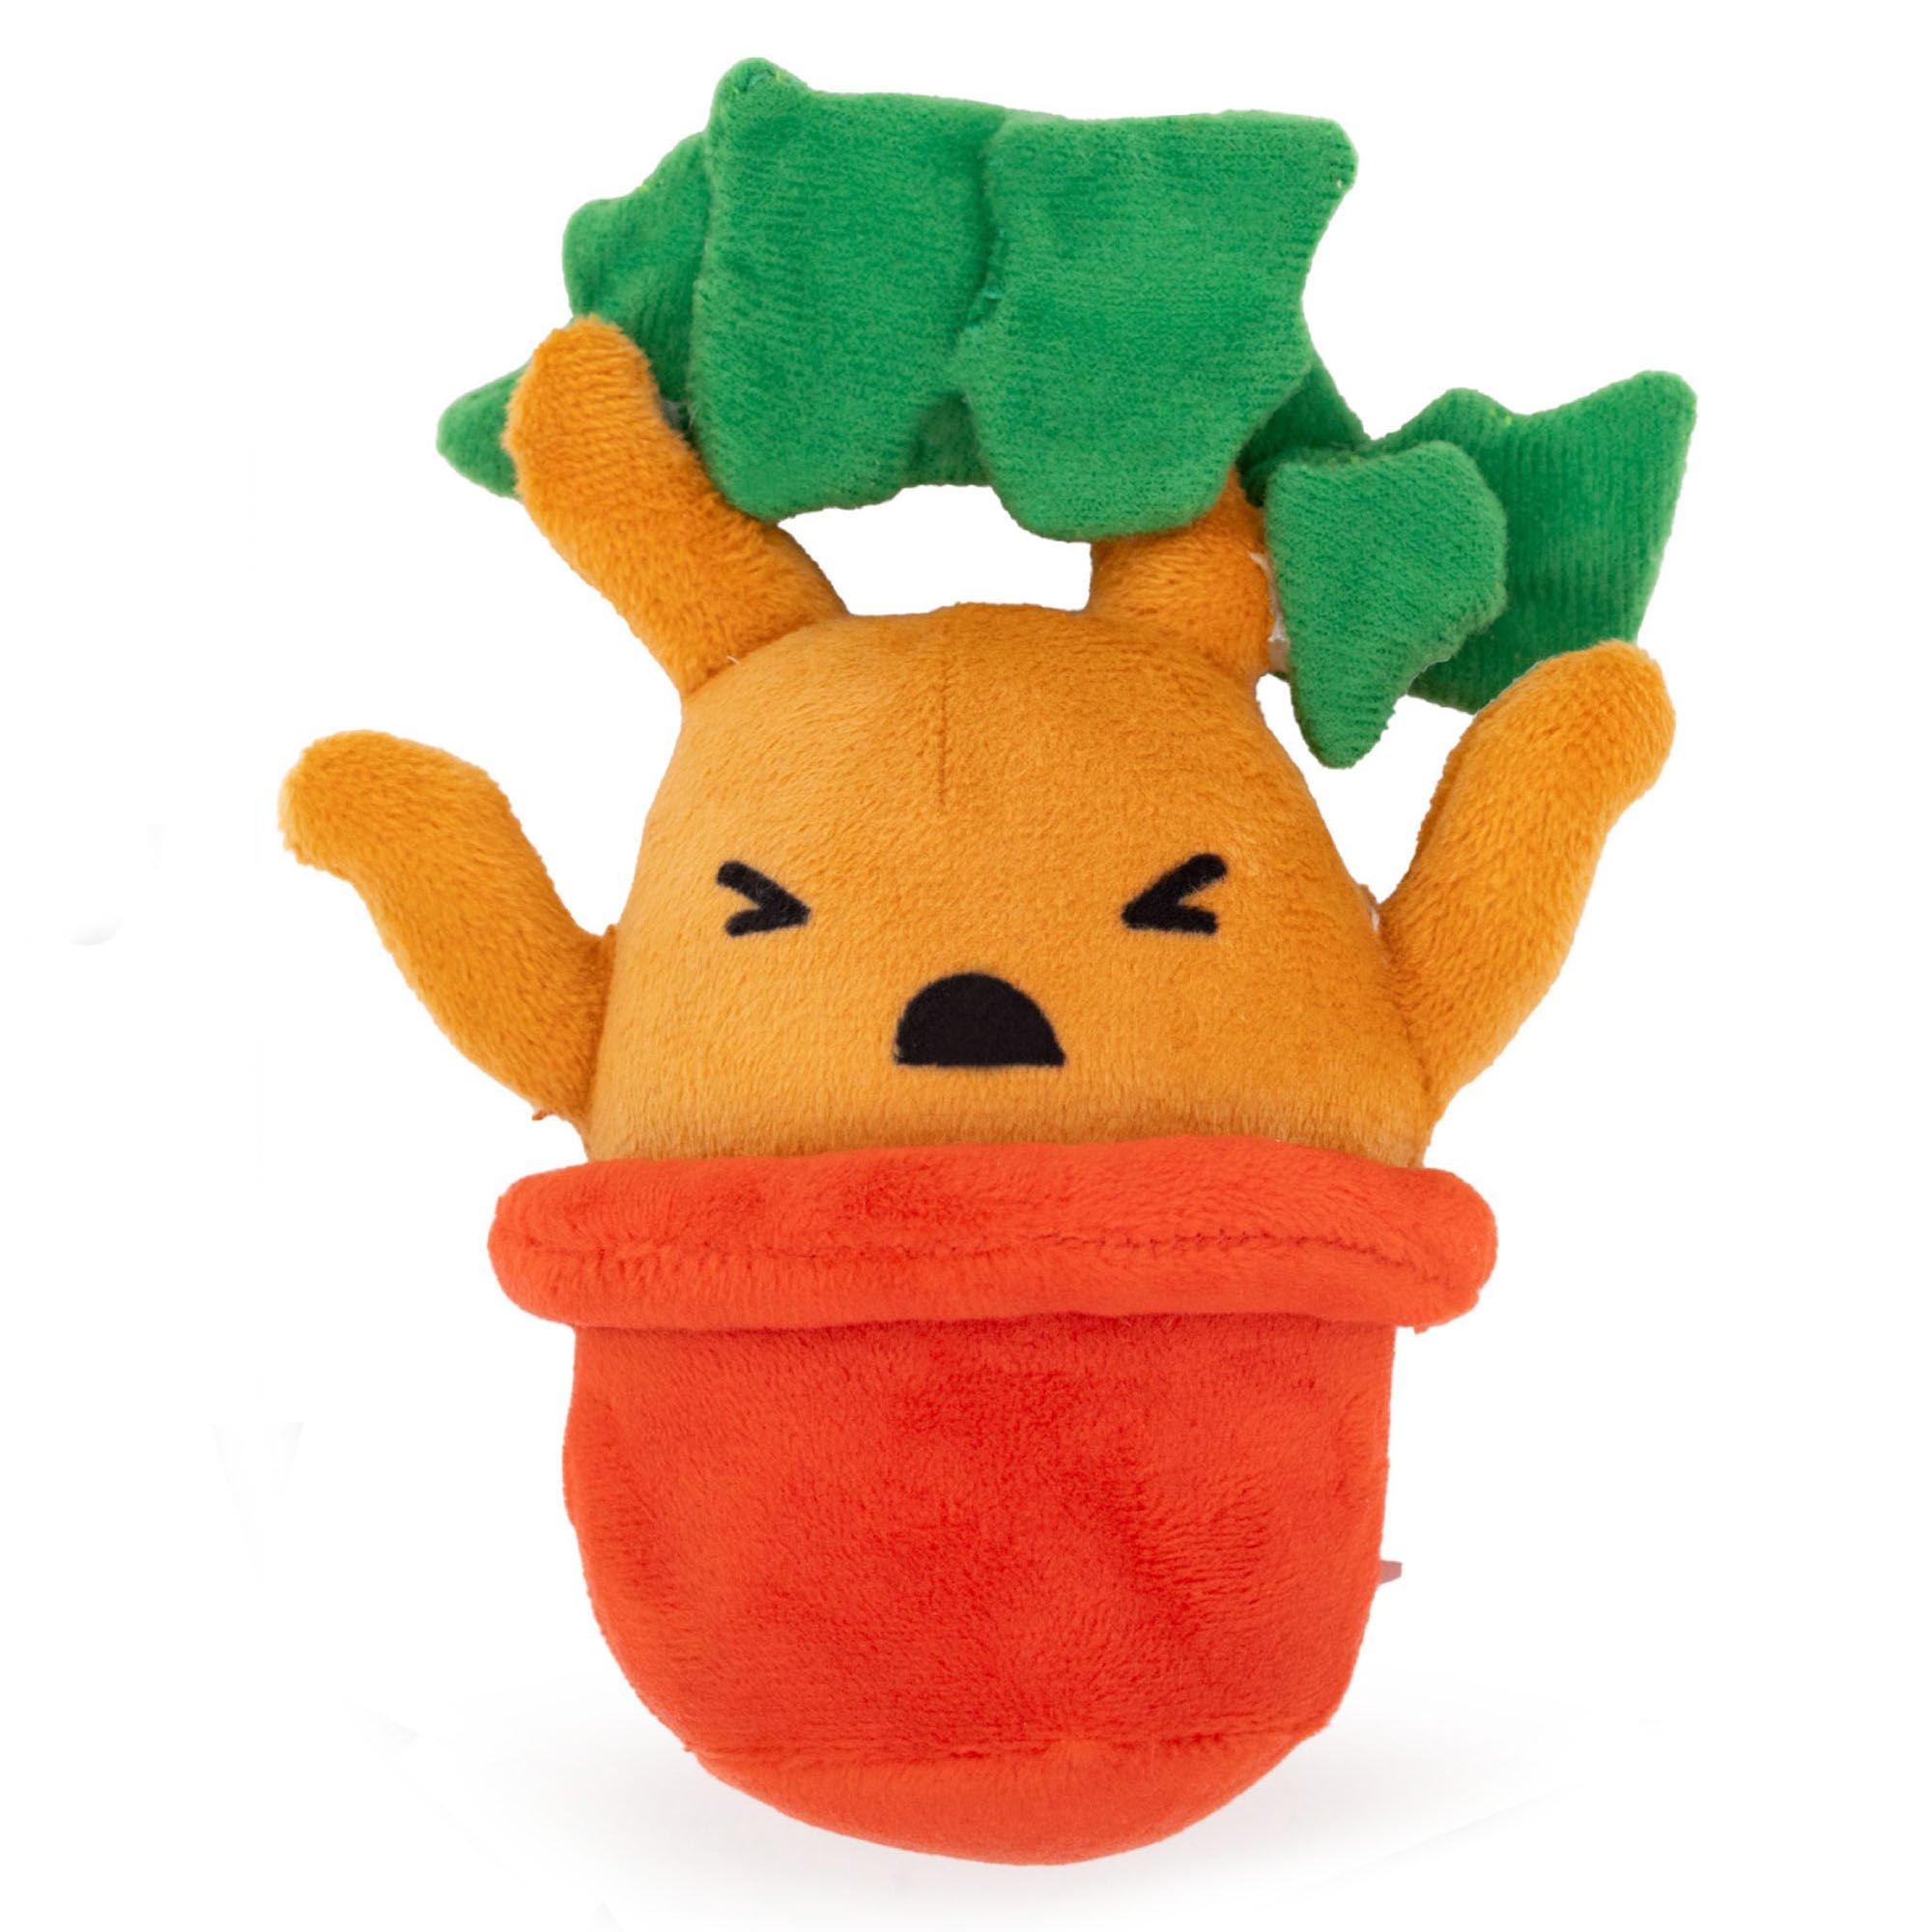 Buckle-Down Harry Potter Dog Toy Squeaker Plush Toy Mandrake